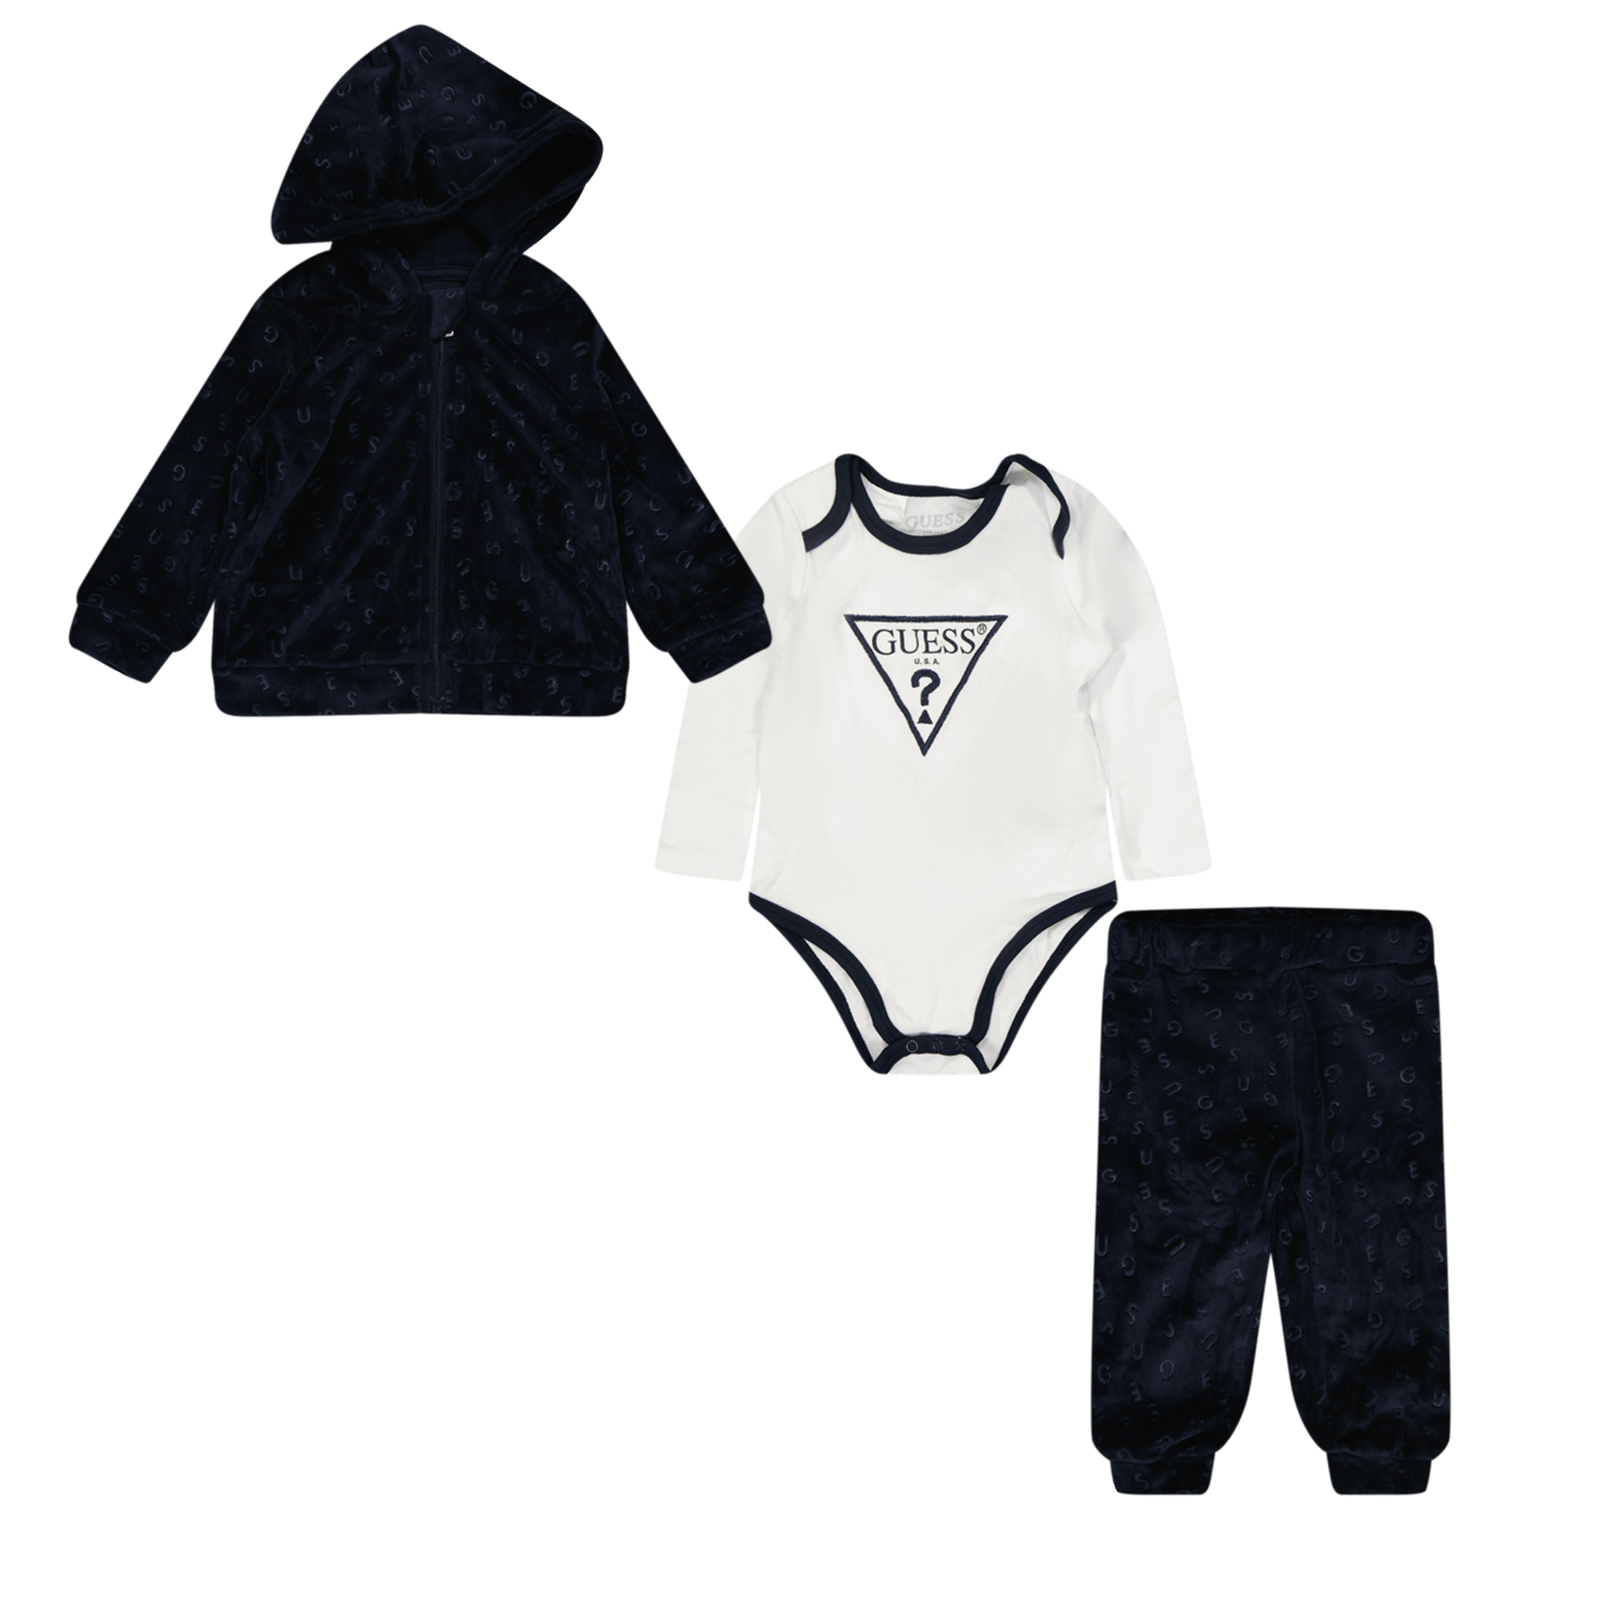 Guess Baby Unisex Set Navy